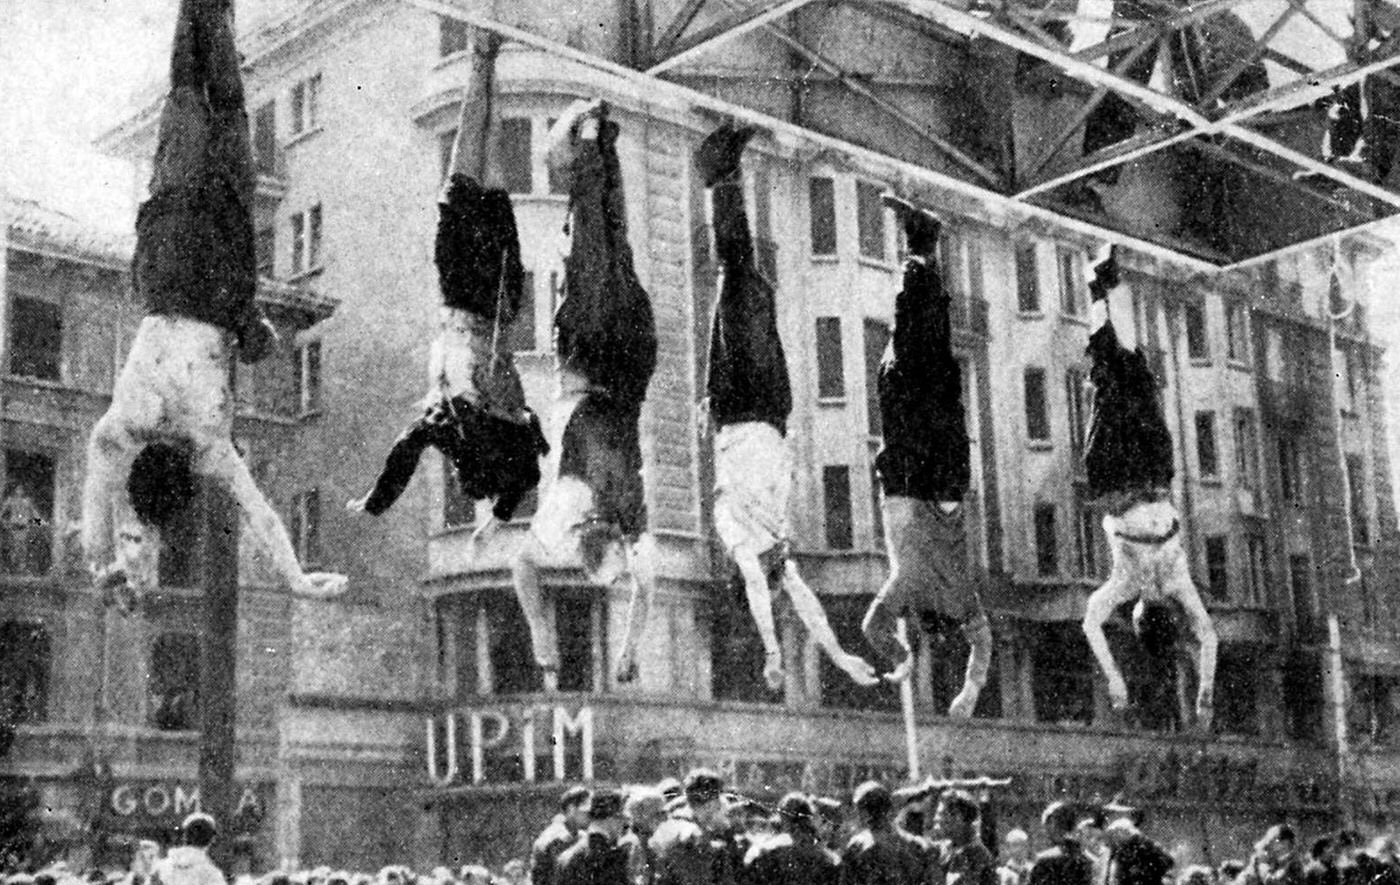 Benito Mussolini, Clara Petacci and Other Fascists Hanged in Milan, 1945